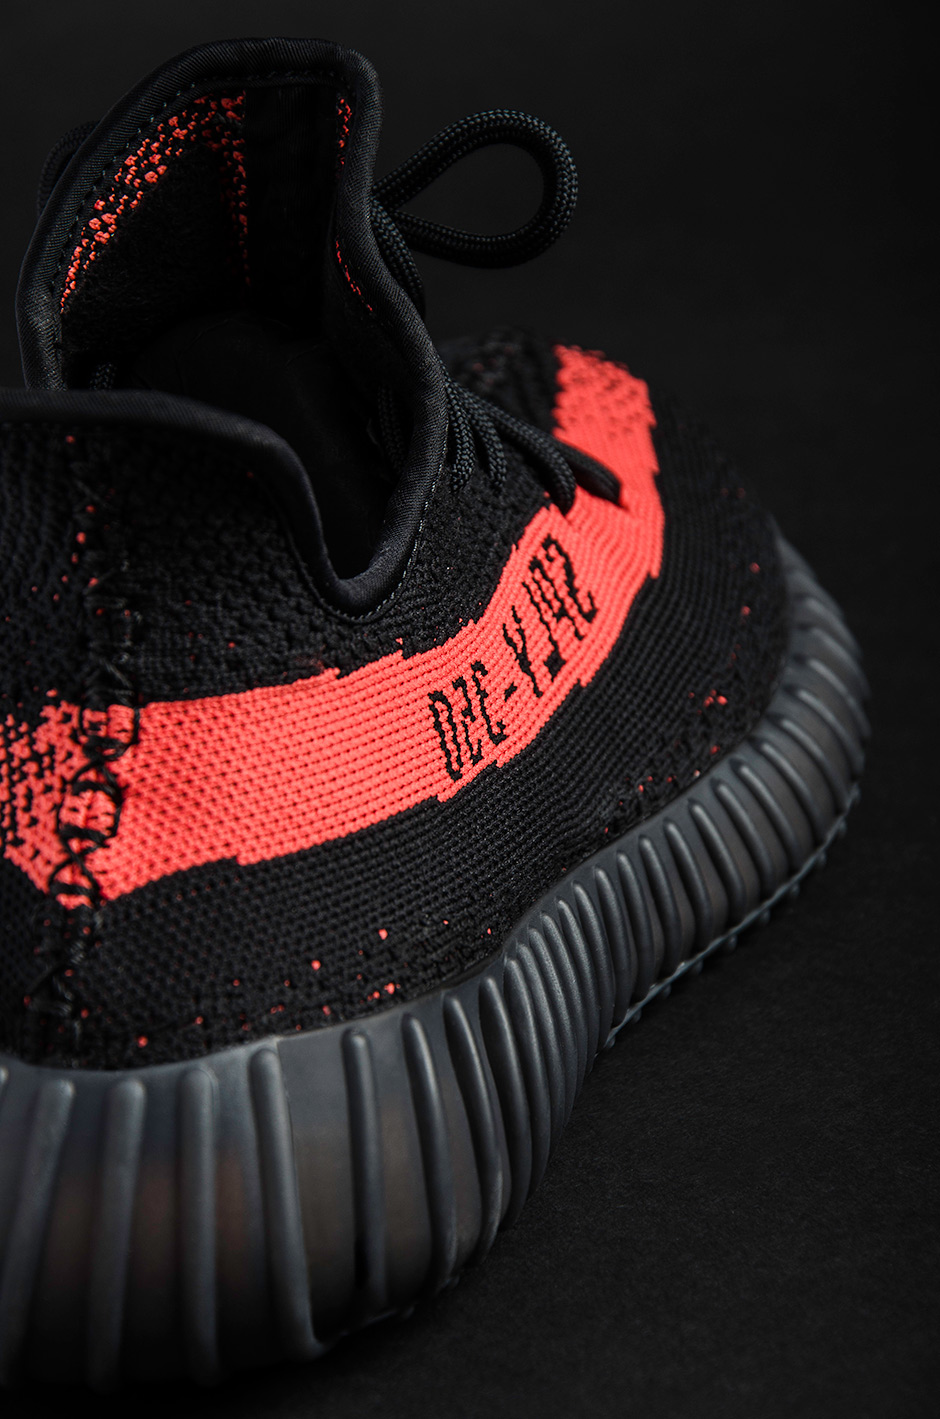 Adidas Yeezy Boost 350 V2 Black Red By9612 7